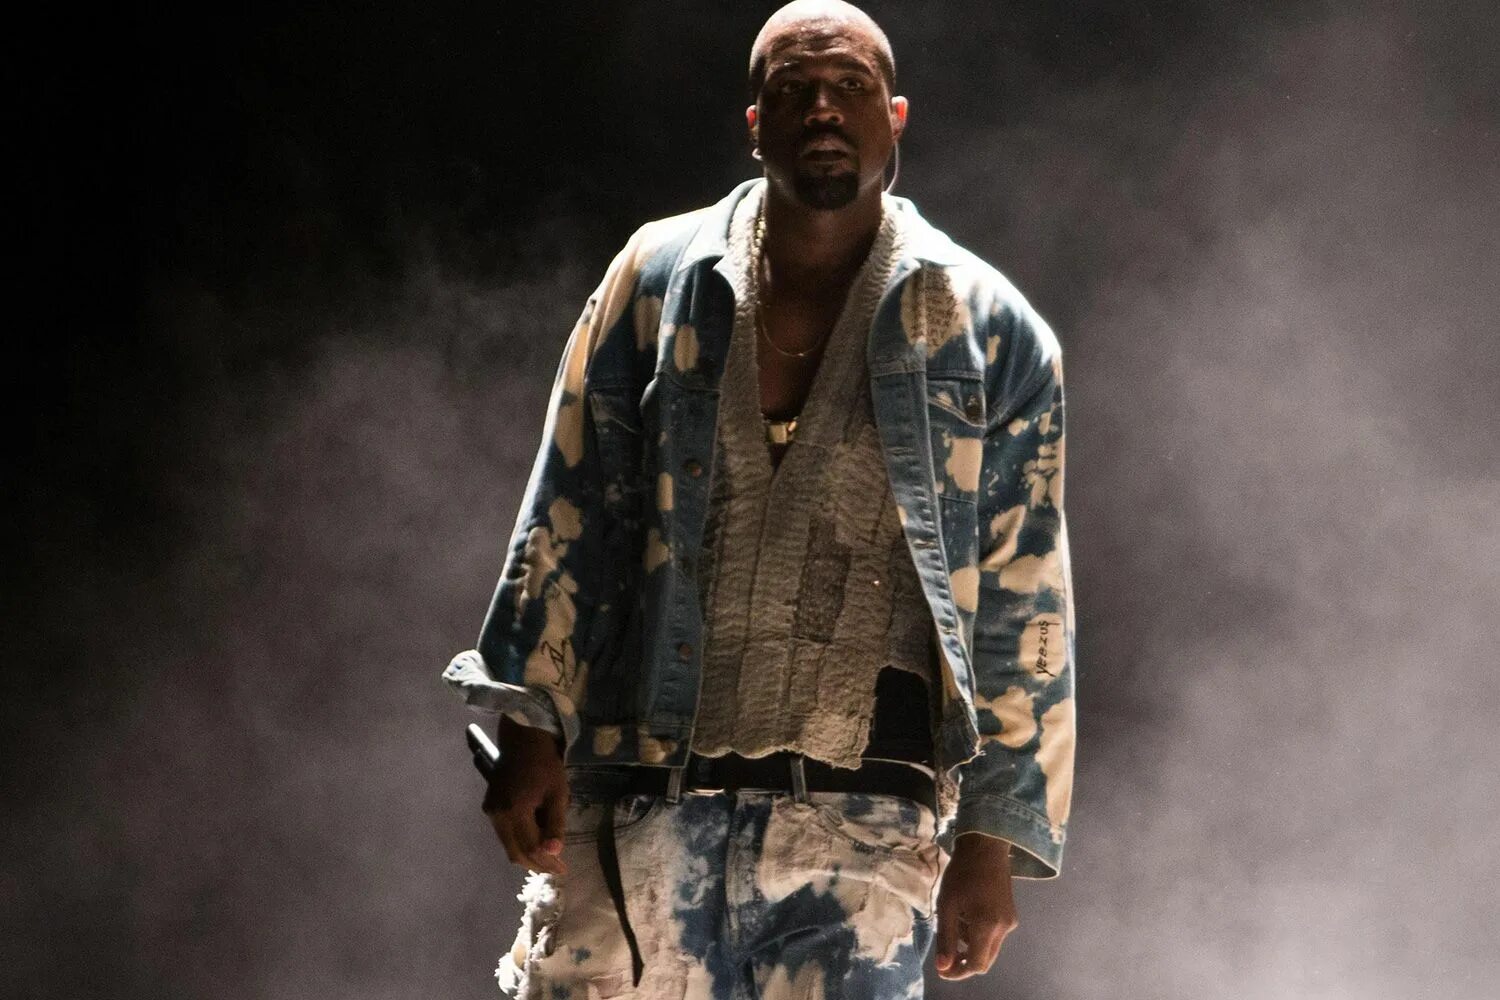 Kanye West. Kanye West 2015. Kanye West 2023. Kanye West Live. Kanye west rich the kid